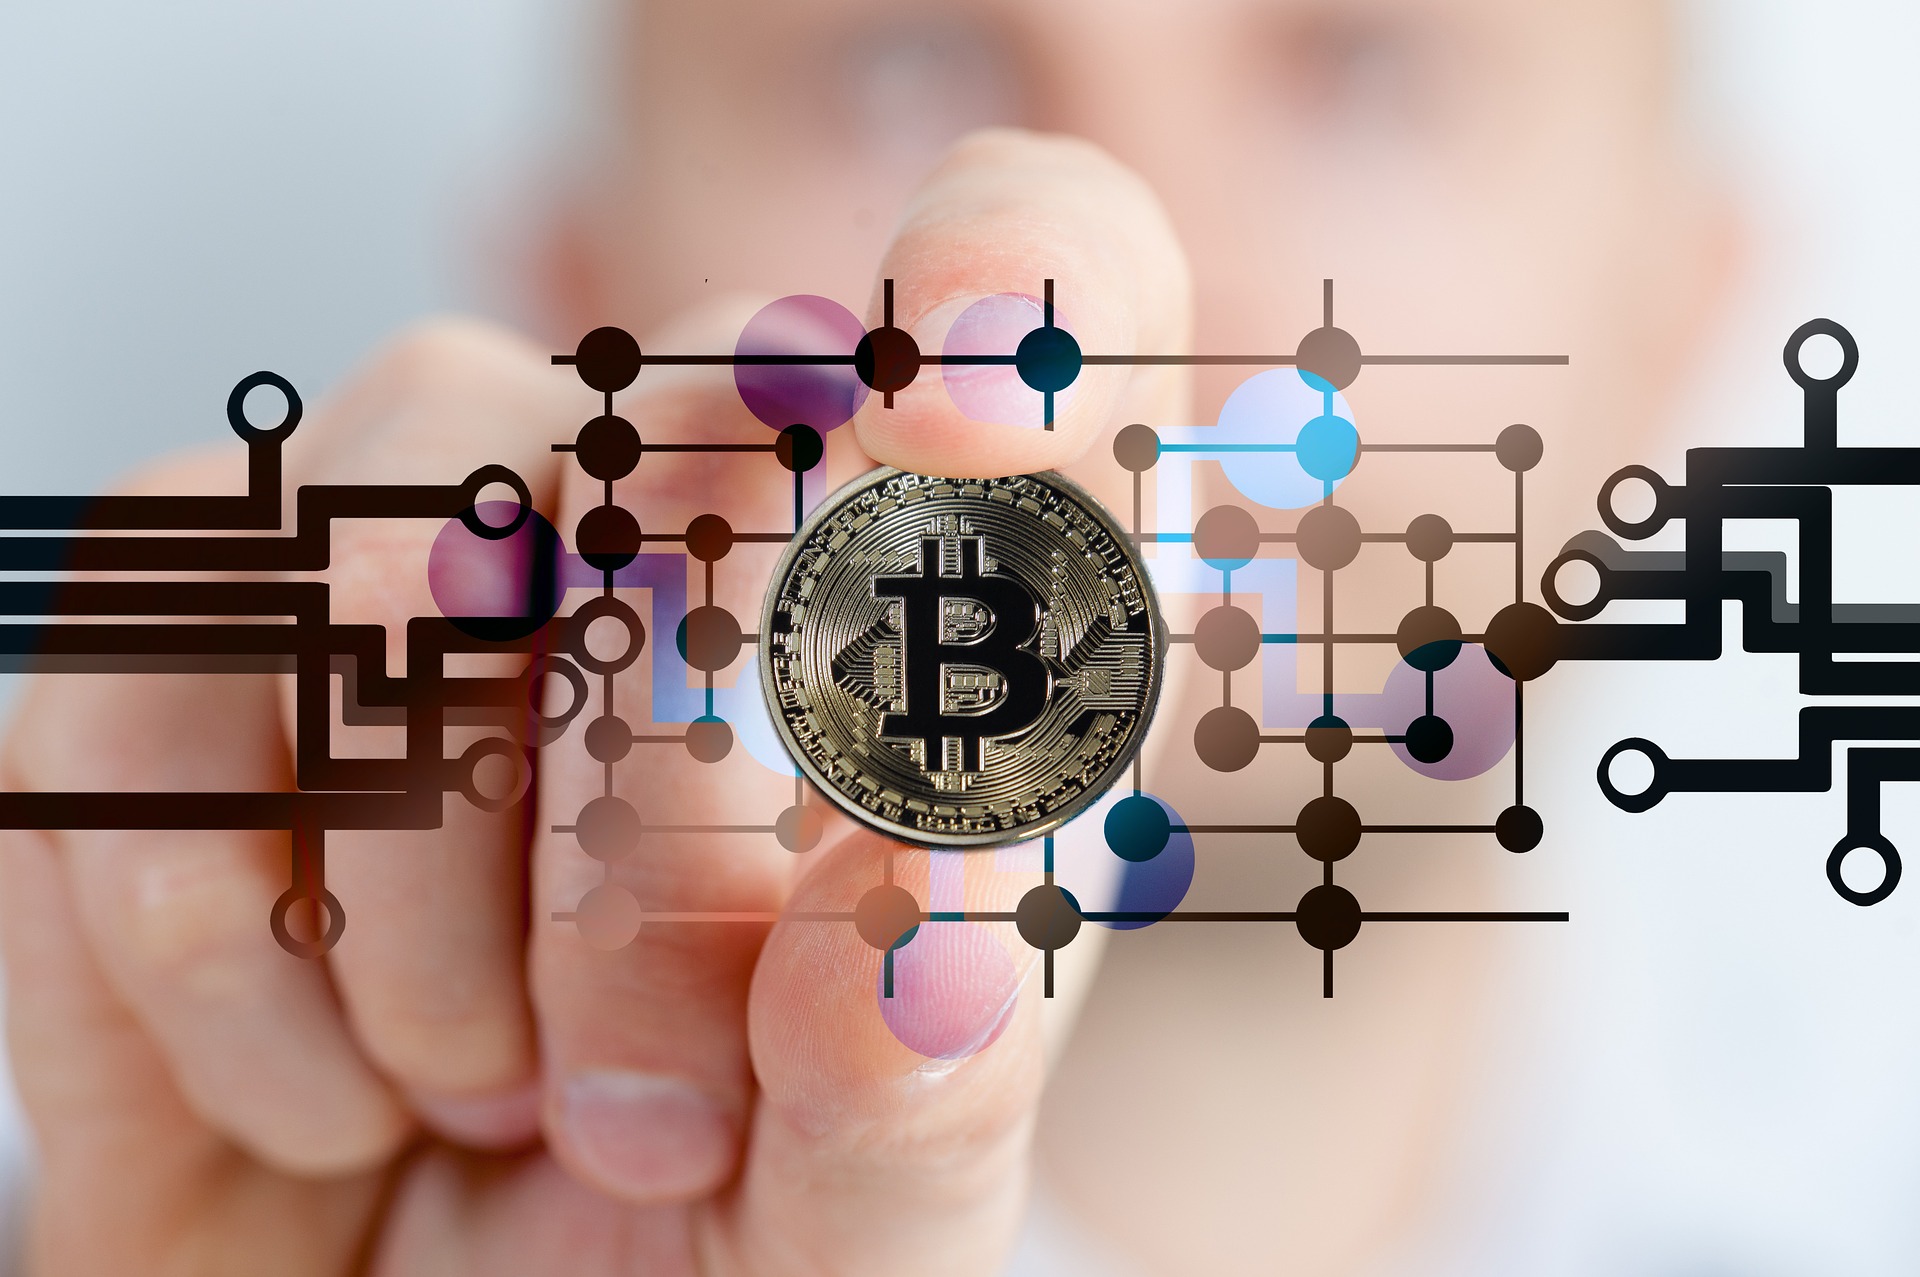 The 10 Forces that Influence Bitcoin and Other Cryptocurrencies